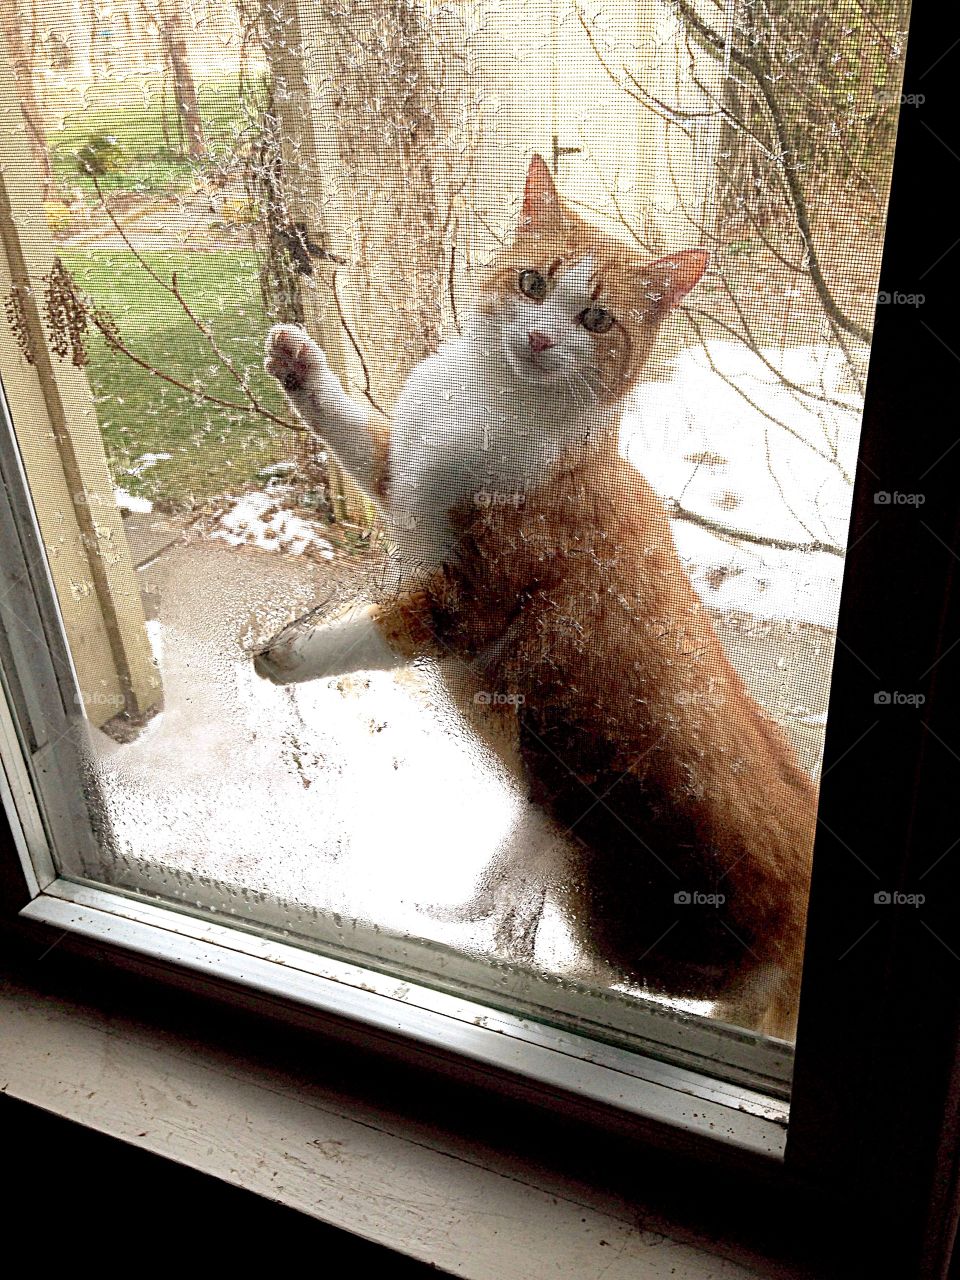 Let me in, says the kitty